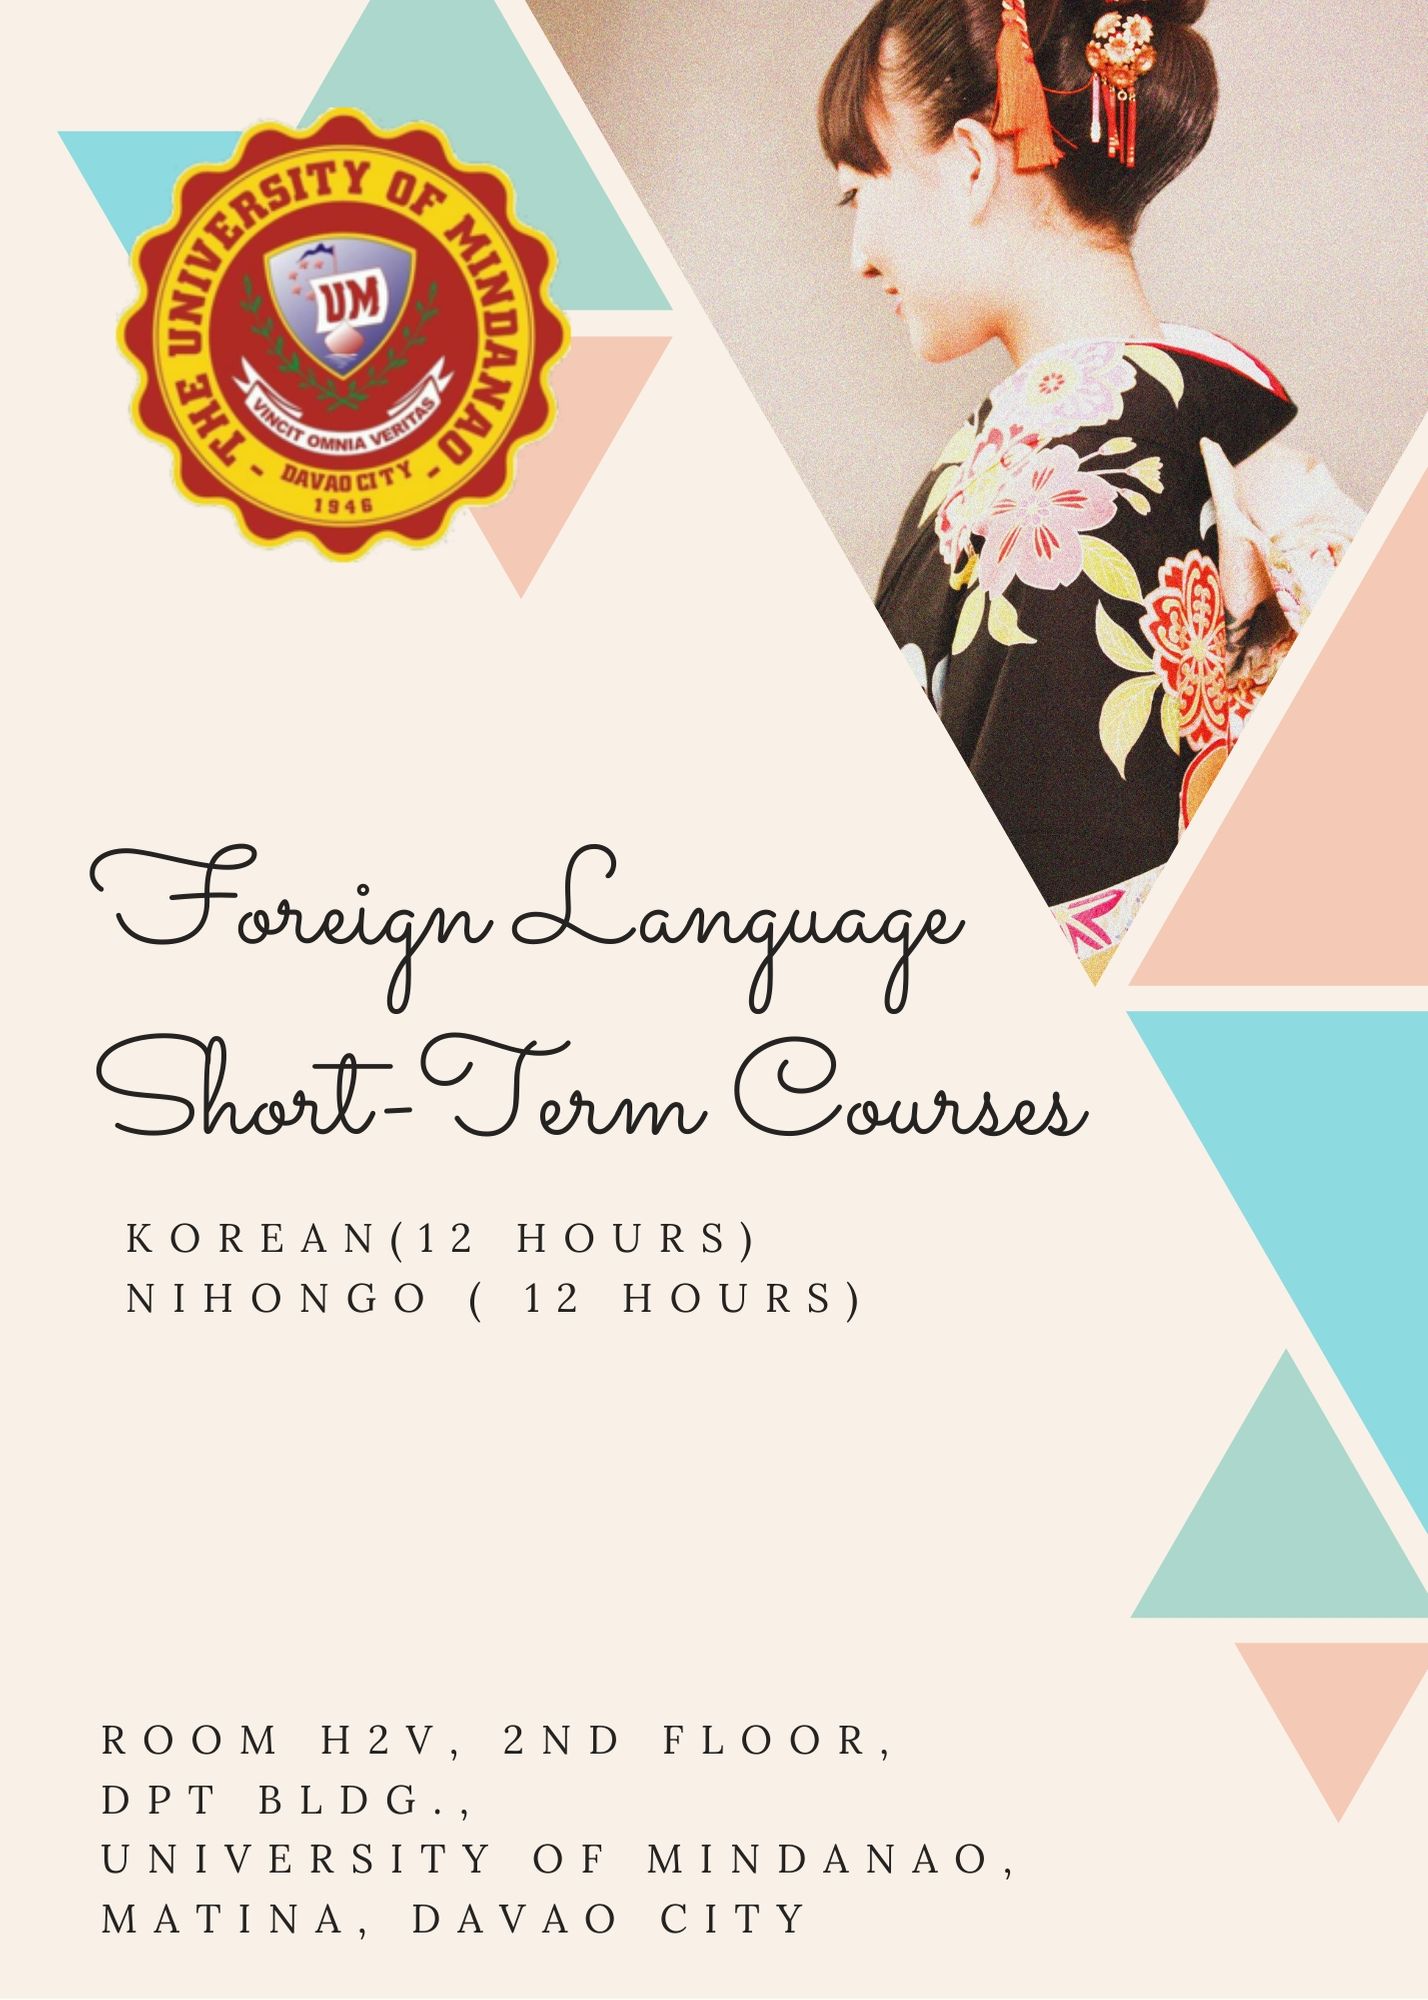 Institute of Languages: Avail of the Foreign Language Short Term Courses!